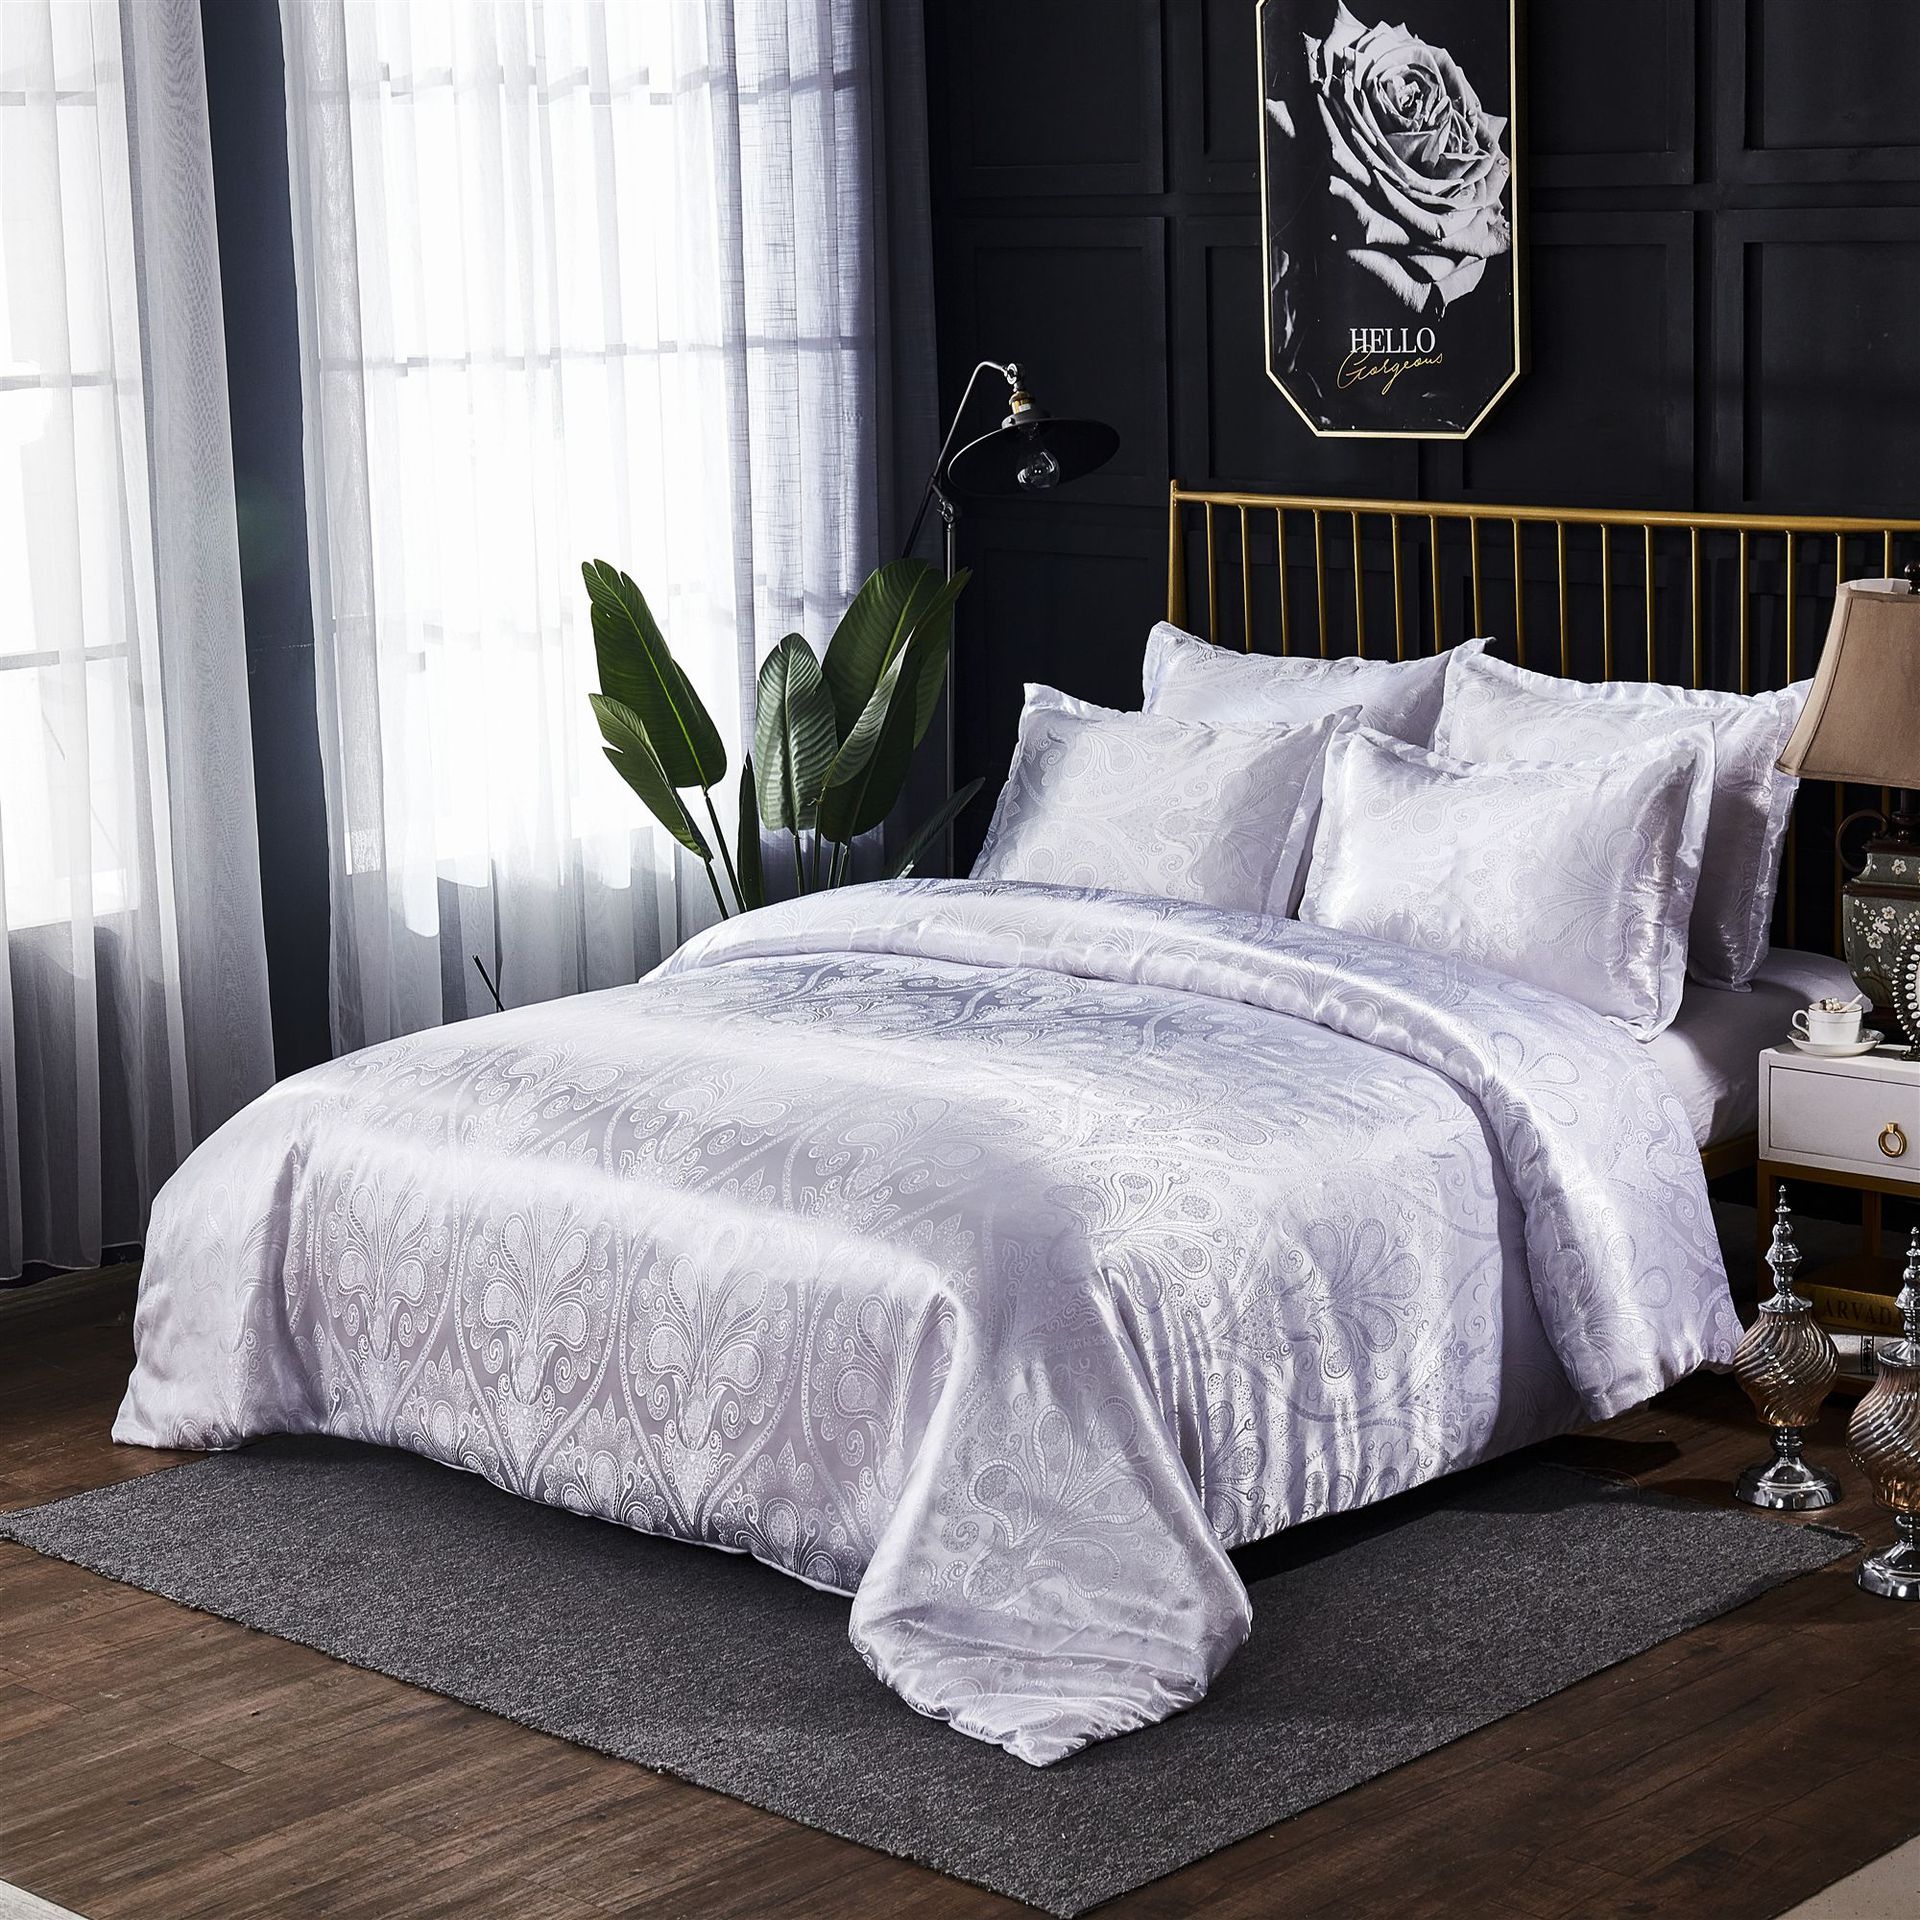 2020 Luxury 2 or 3pcs Bedding Set Satin Jacquard Duvet Cover Sets 1 Quilt Cover + 1/2 Pillowcases Twin Double Full Queen King